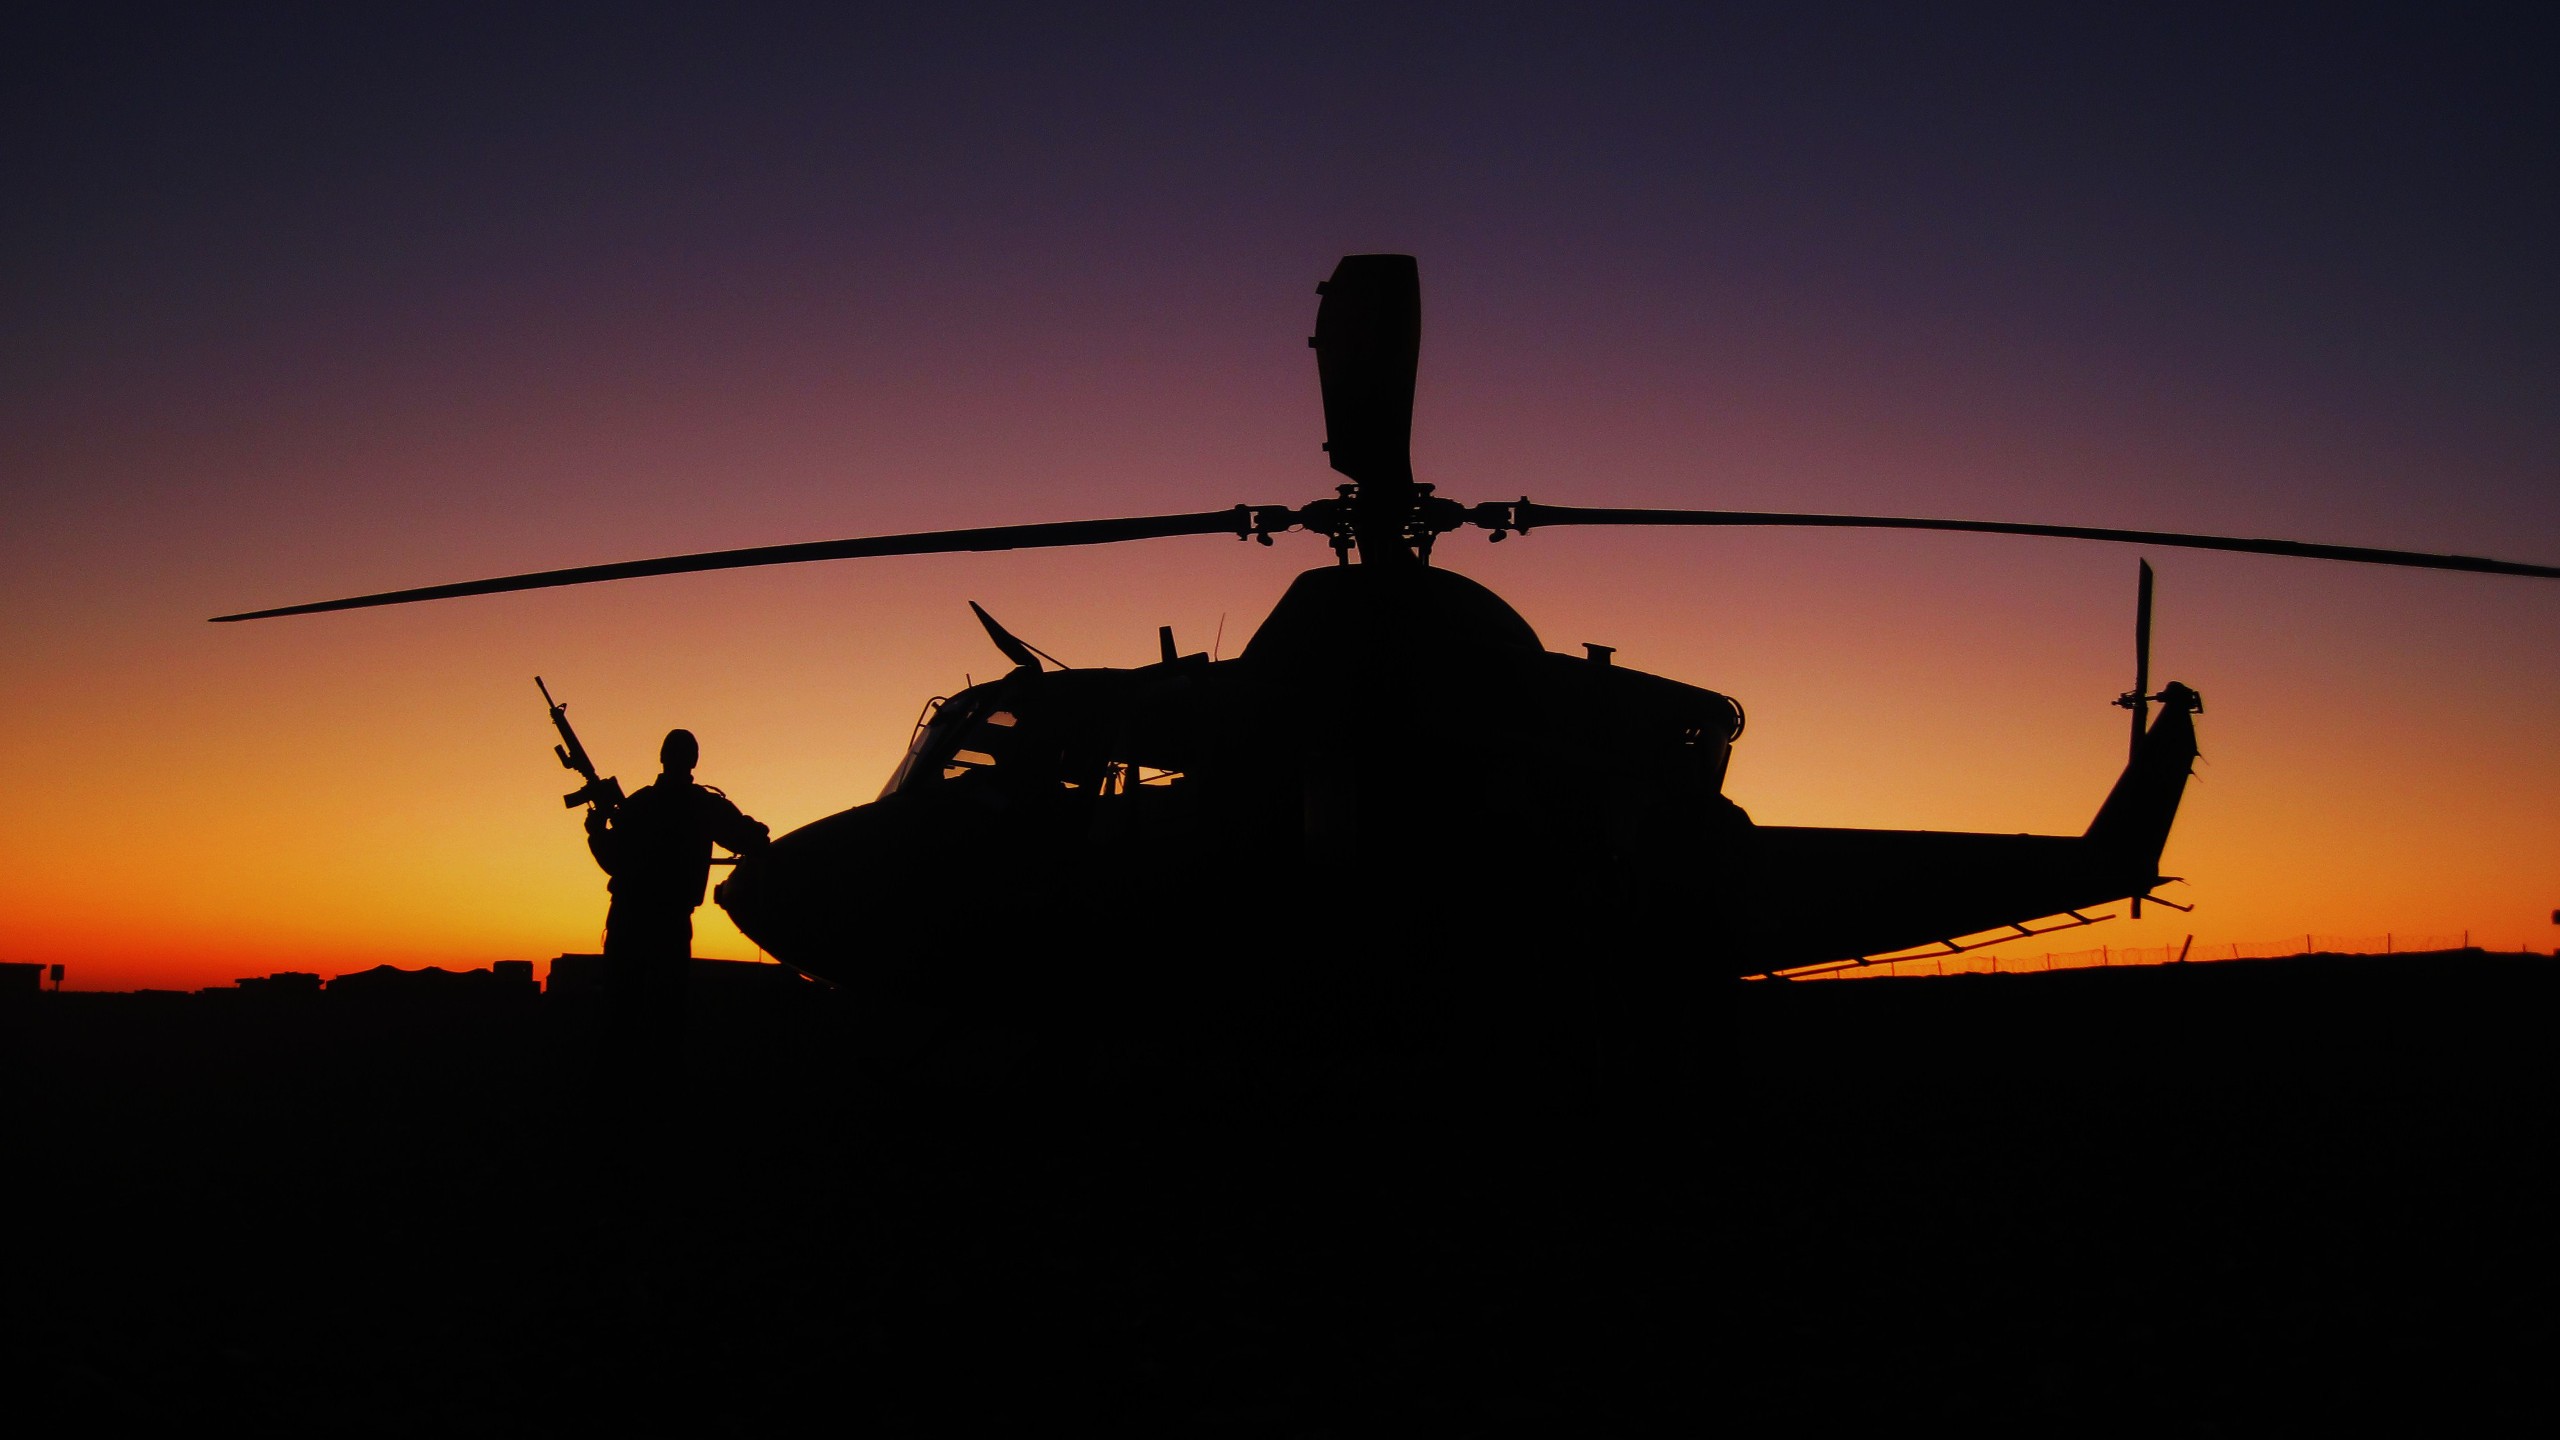 General 2560x1440 military aircraft military aircraft helicopters Royal Canadian Air Force silhouette shadow sunset dark weapon vehicle sunlight